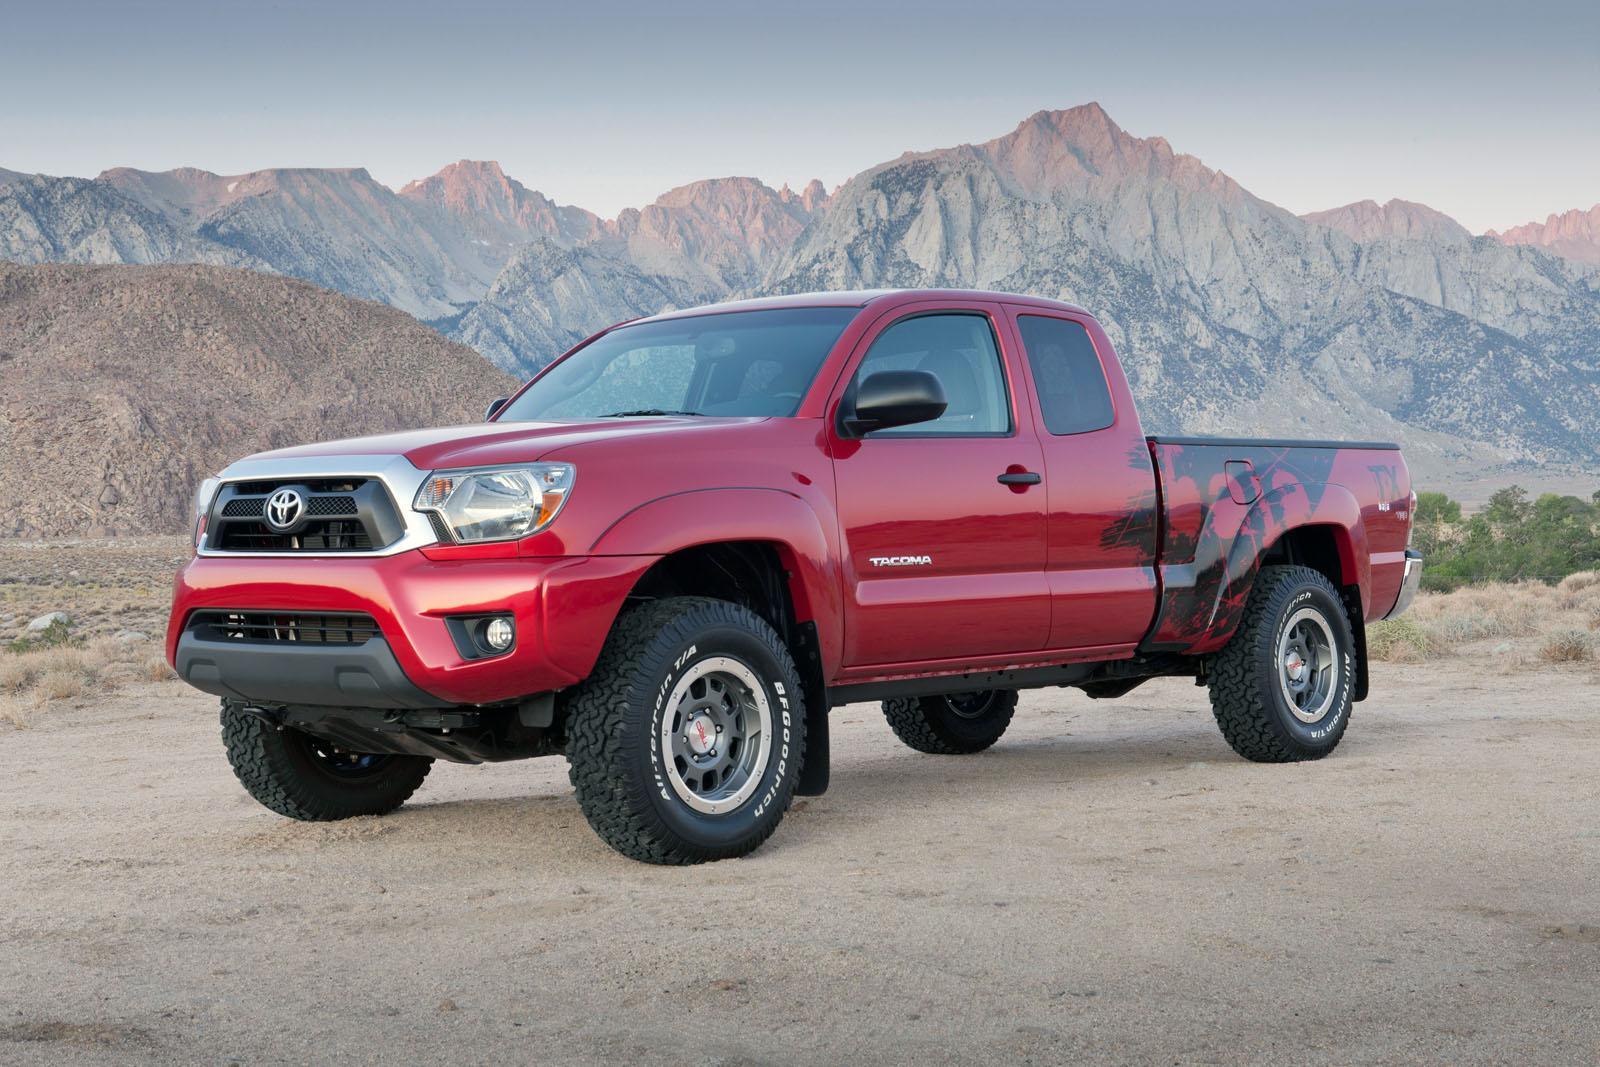 Toyota Tacoma TRD T X Baja Series 2012 Photo 71822 Picture At